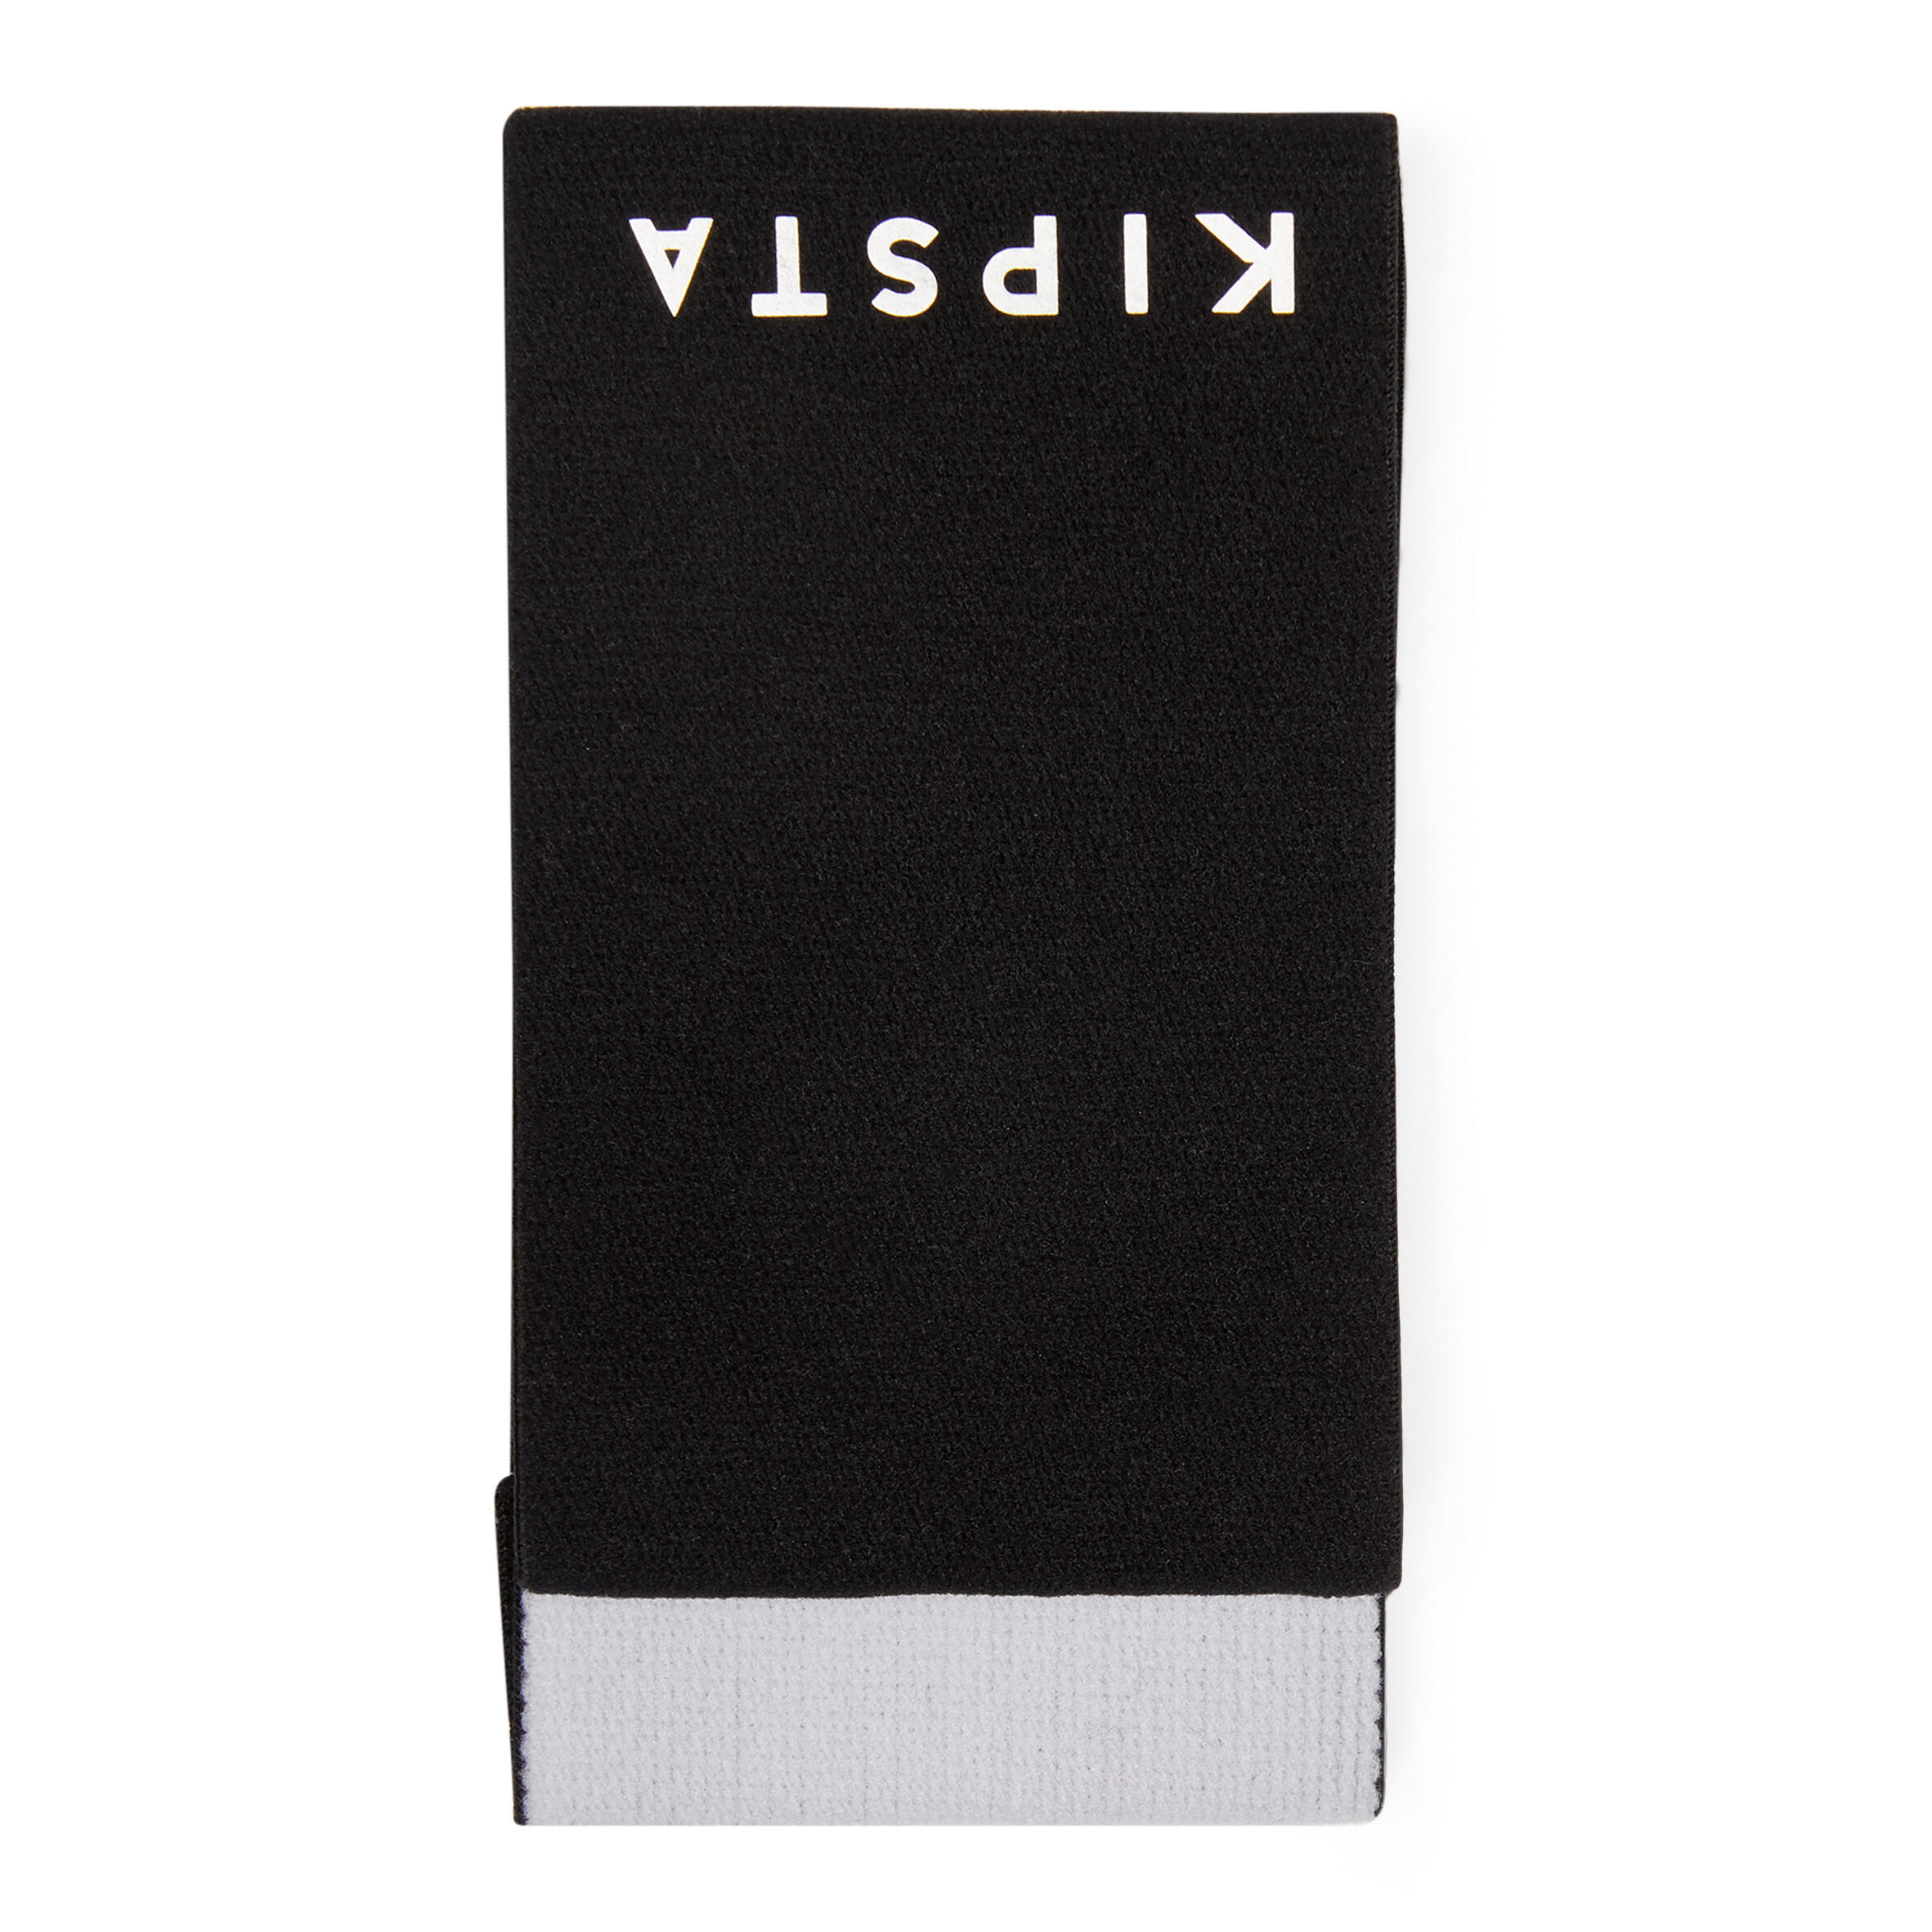 Reversible Support Strap - Black or White 3/4